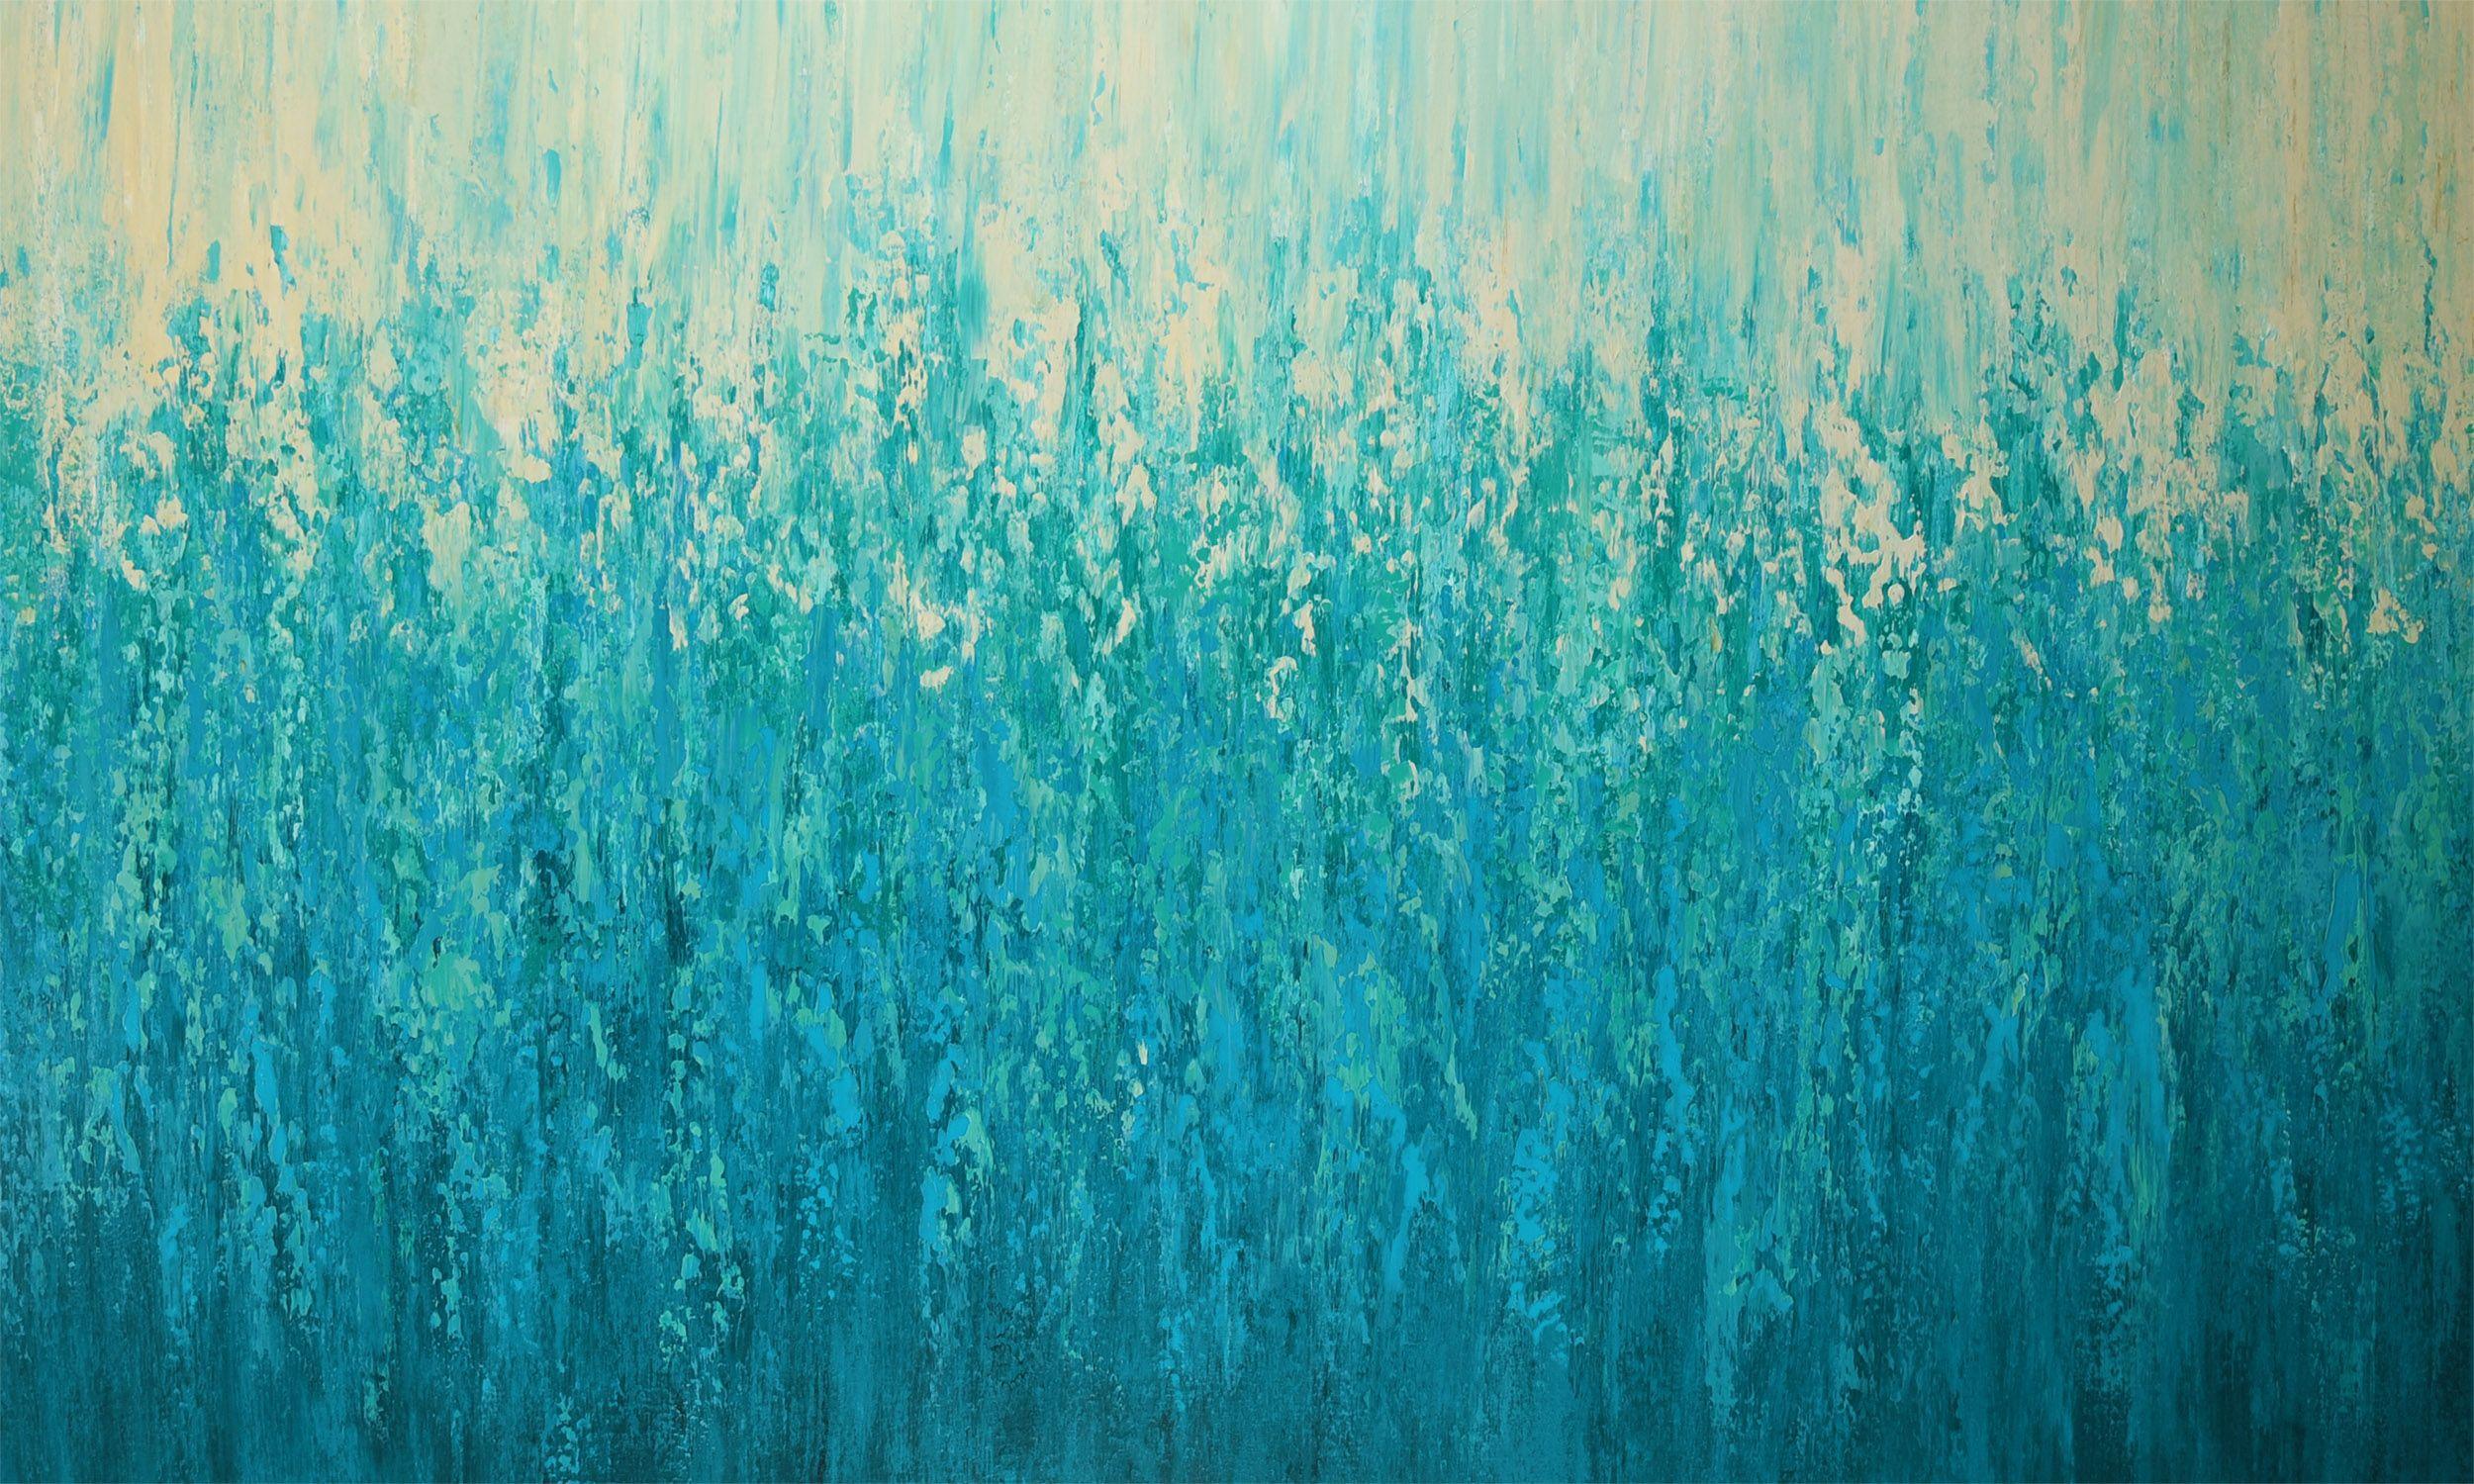 Blue Waters is an original abstract seascape painting on canvas by Suzanne Vaughan. It captures the calming essence of nature in the fresh turquoise blues and light pastel colors. Painted in an abstract expressionist style, the paint is applied to